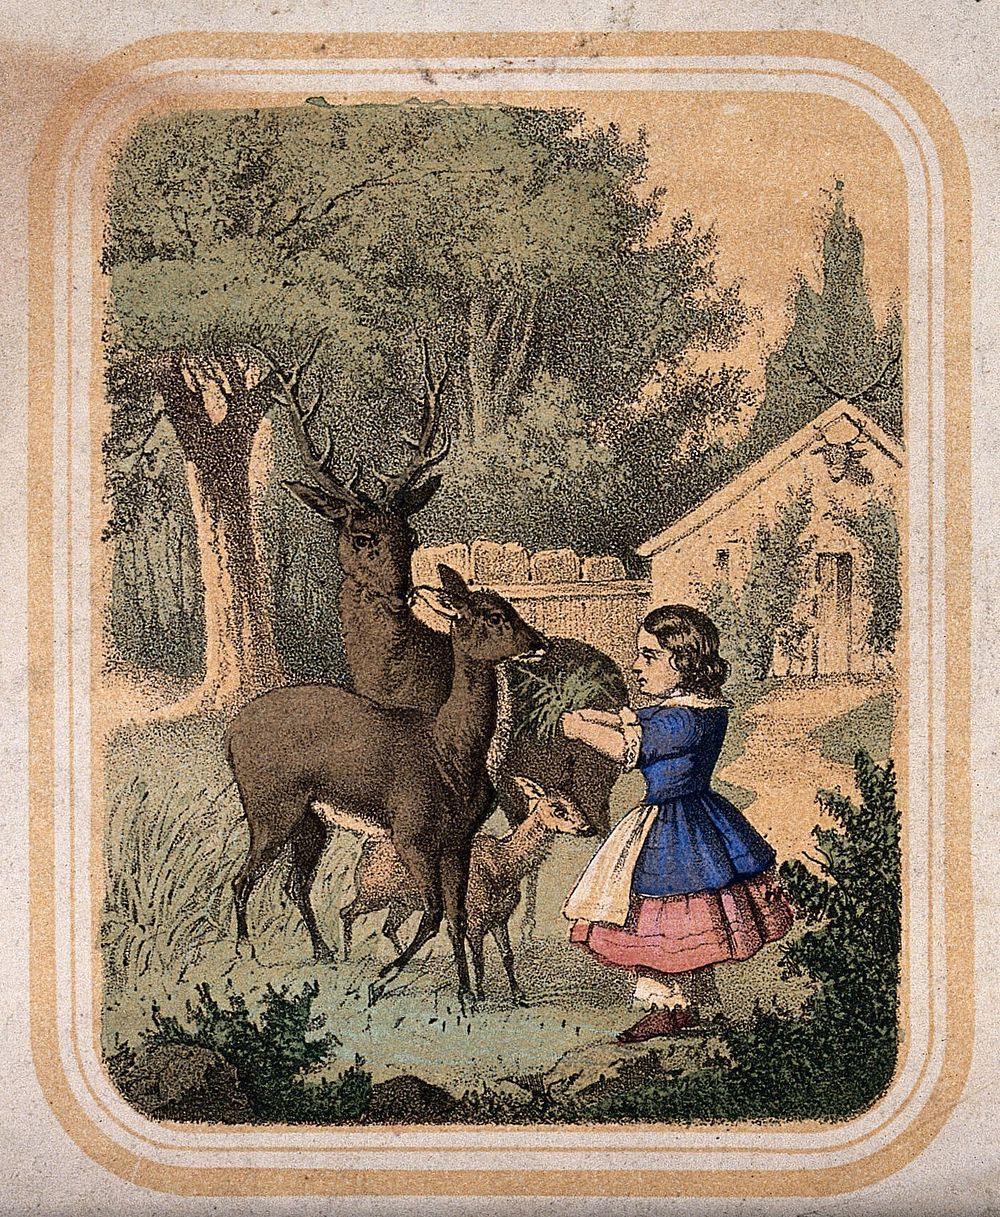 A small girl is feeding leaves to deer in a garden outside a cottage. Coloured lithograph.